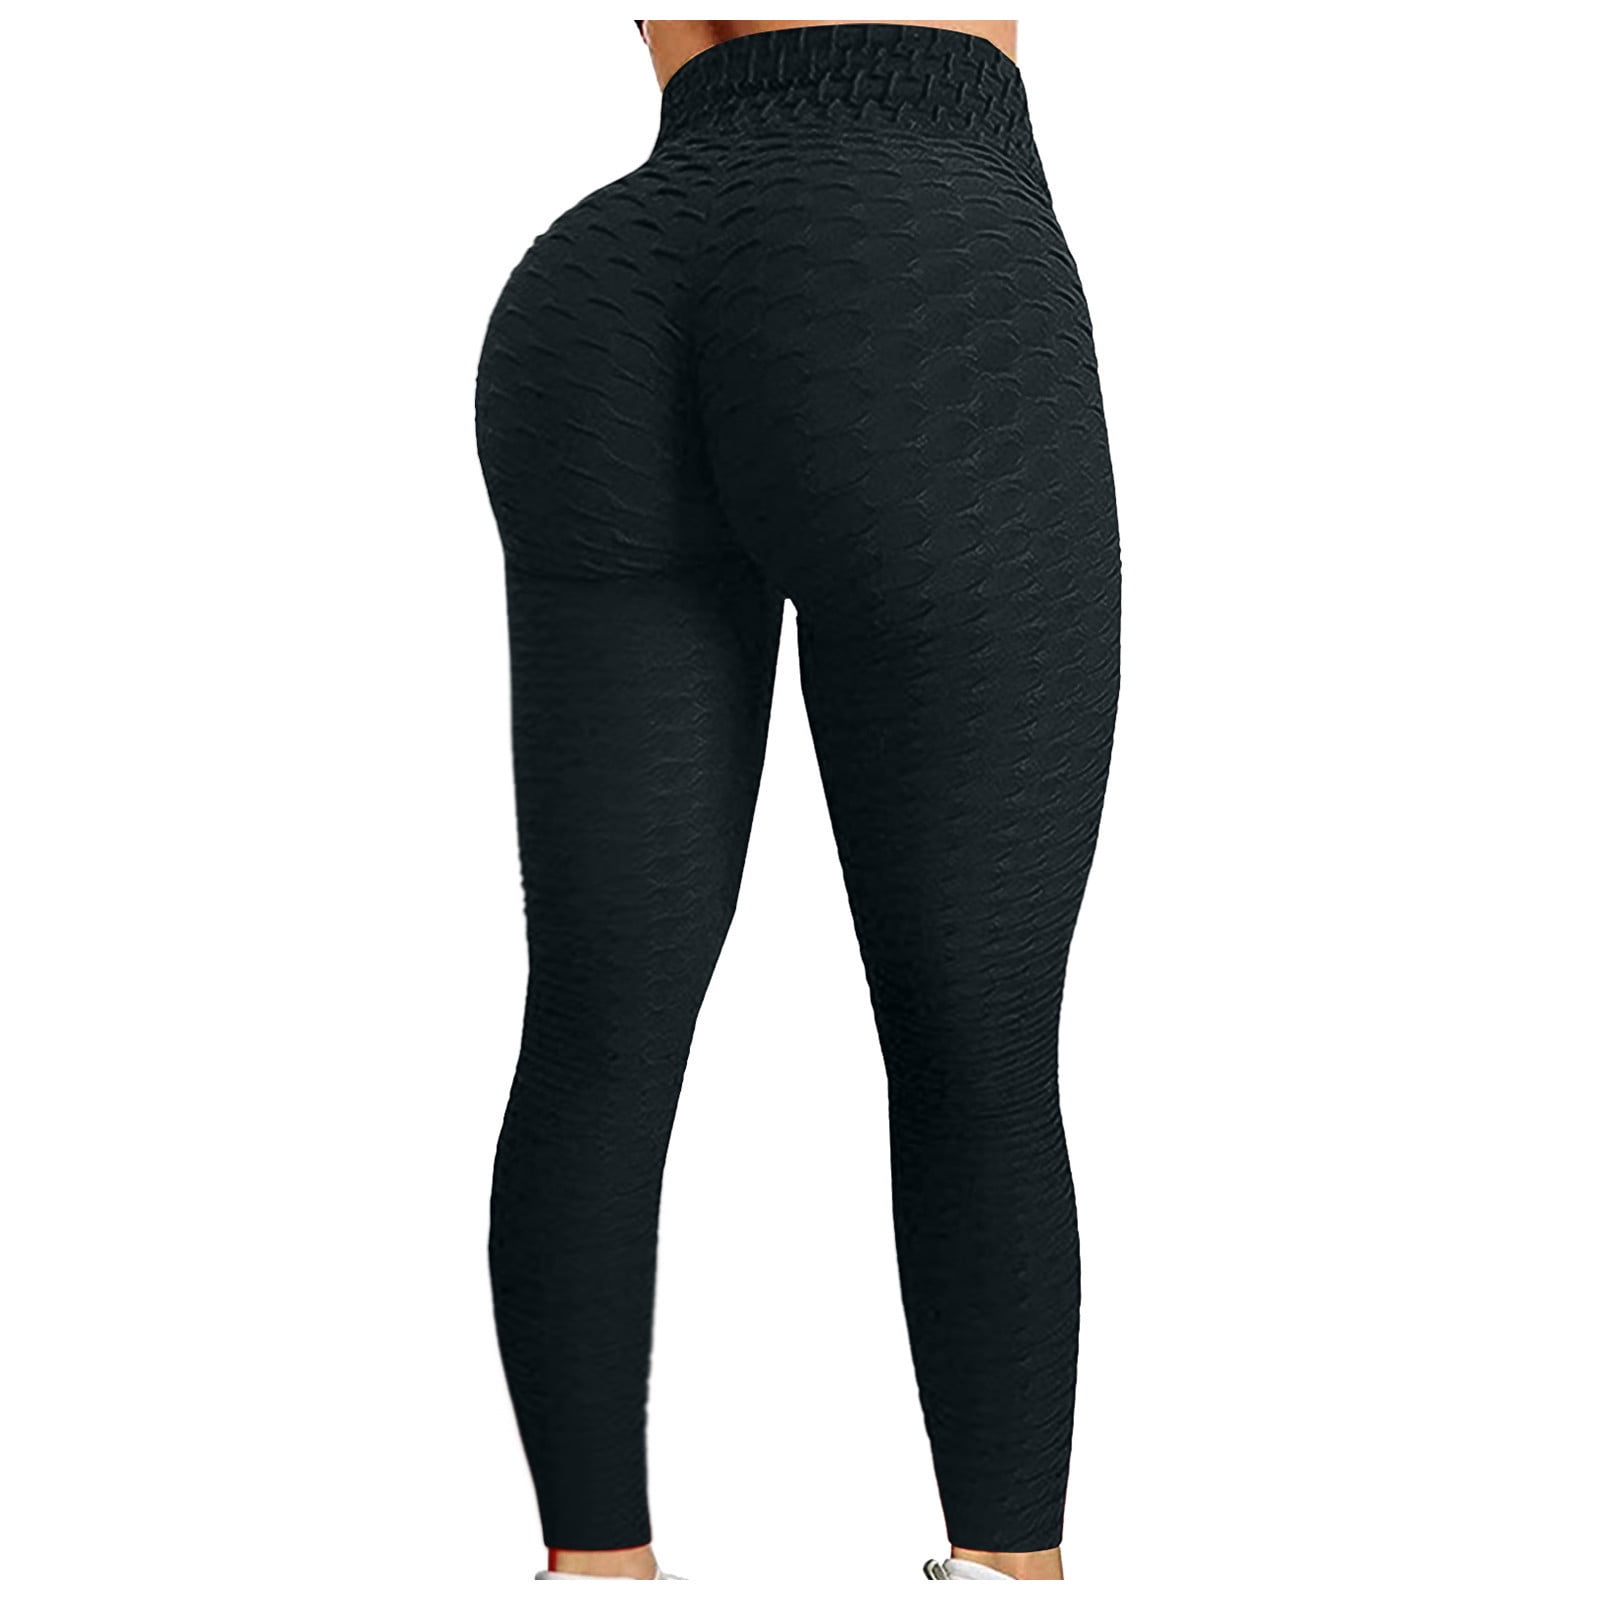 SELONE Compression Leggings for Women Workout Butt Lifting Gym Long Length  High Waist Running Sports Yogalicious Utility Dressy Everyday Soft Capri  Jeggings Athletic Leggings for Women 6-Black L 